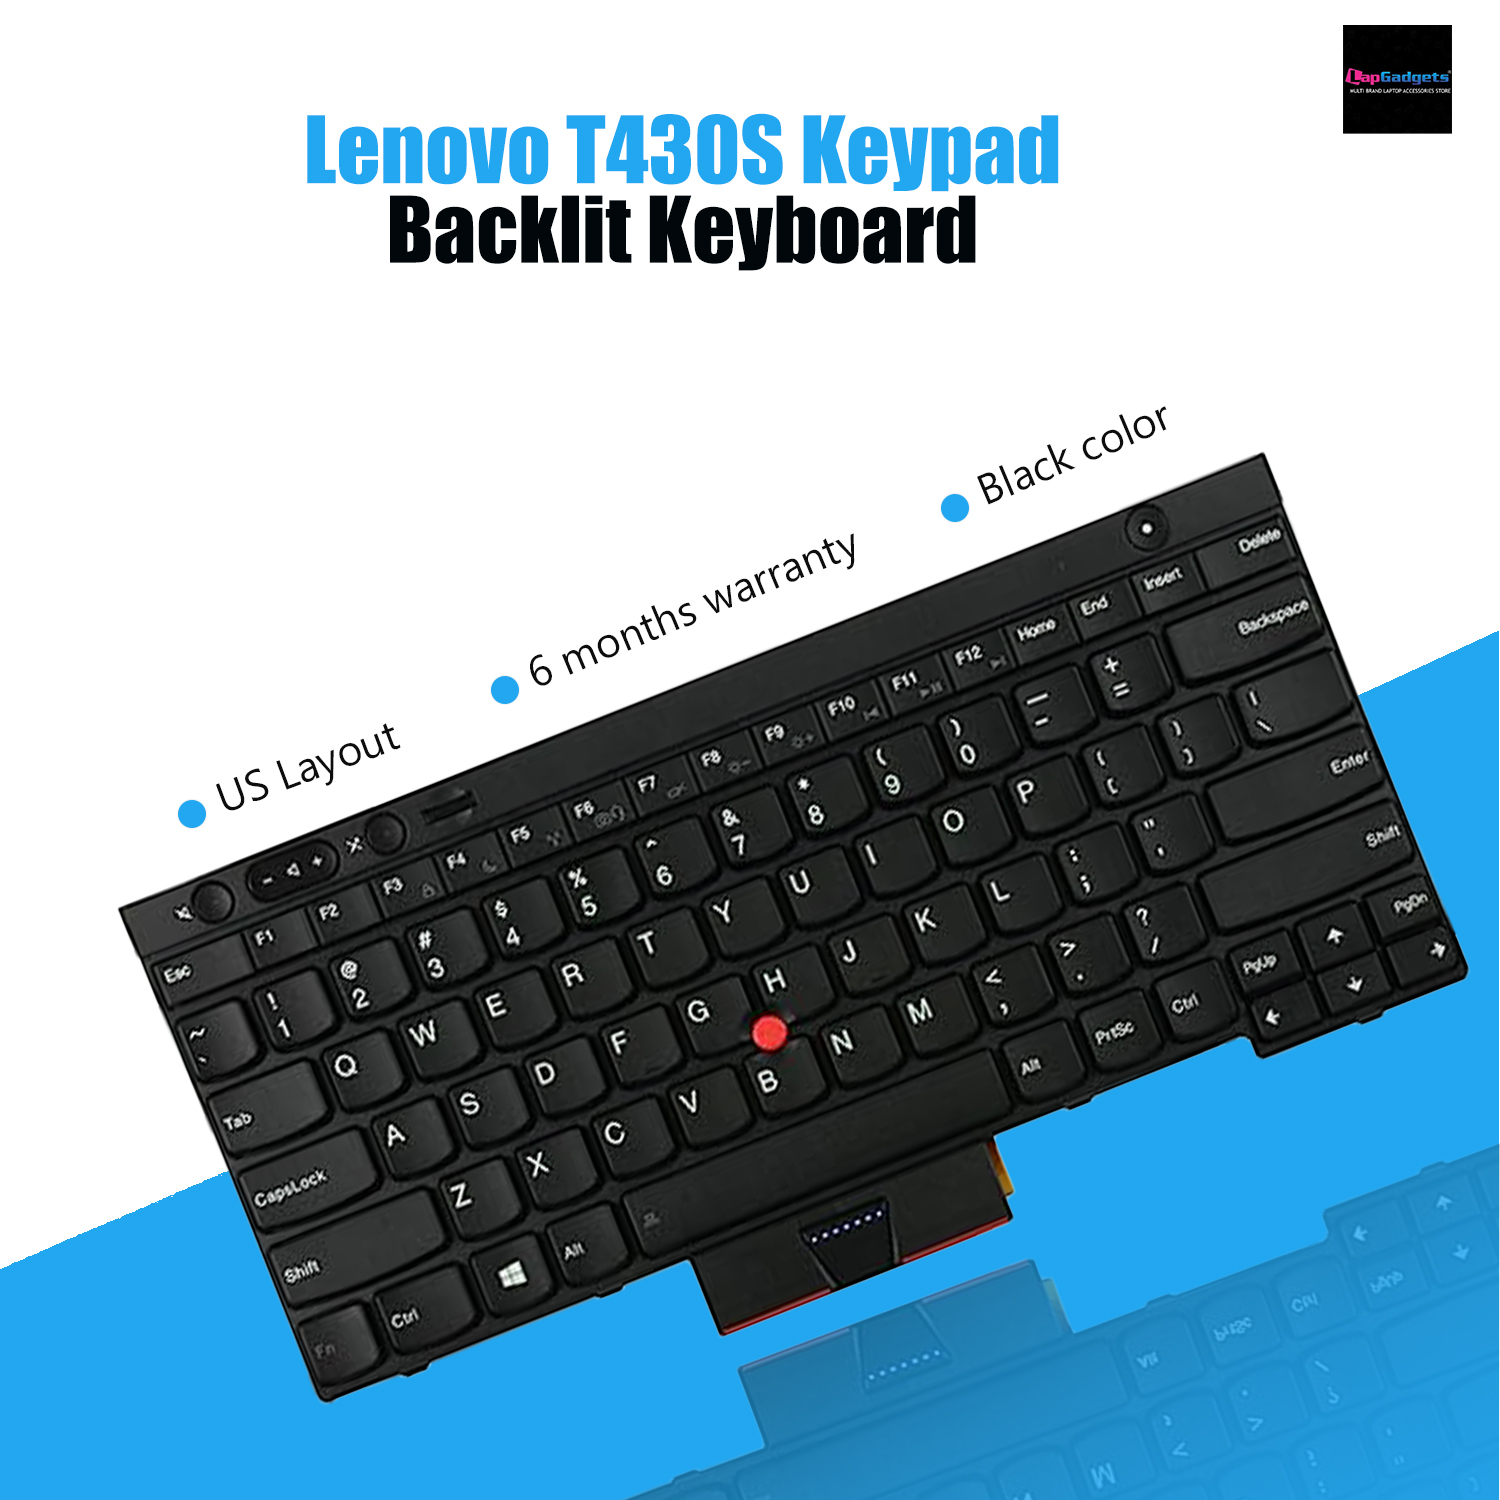 New Backlit Keyboard for ThinkPad T430S/T430/T430I (Not Compatible with T430U) & X230/X230T/X230I (Not Compatible with X230S) - T530/W530 - Available at Lapgadgets